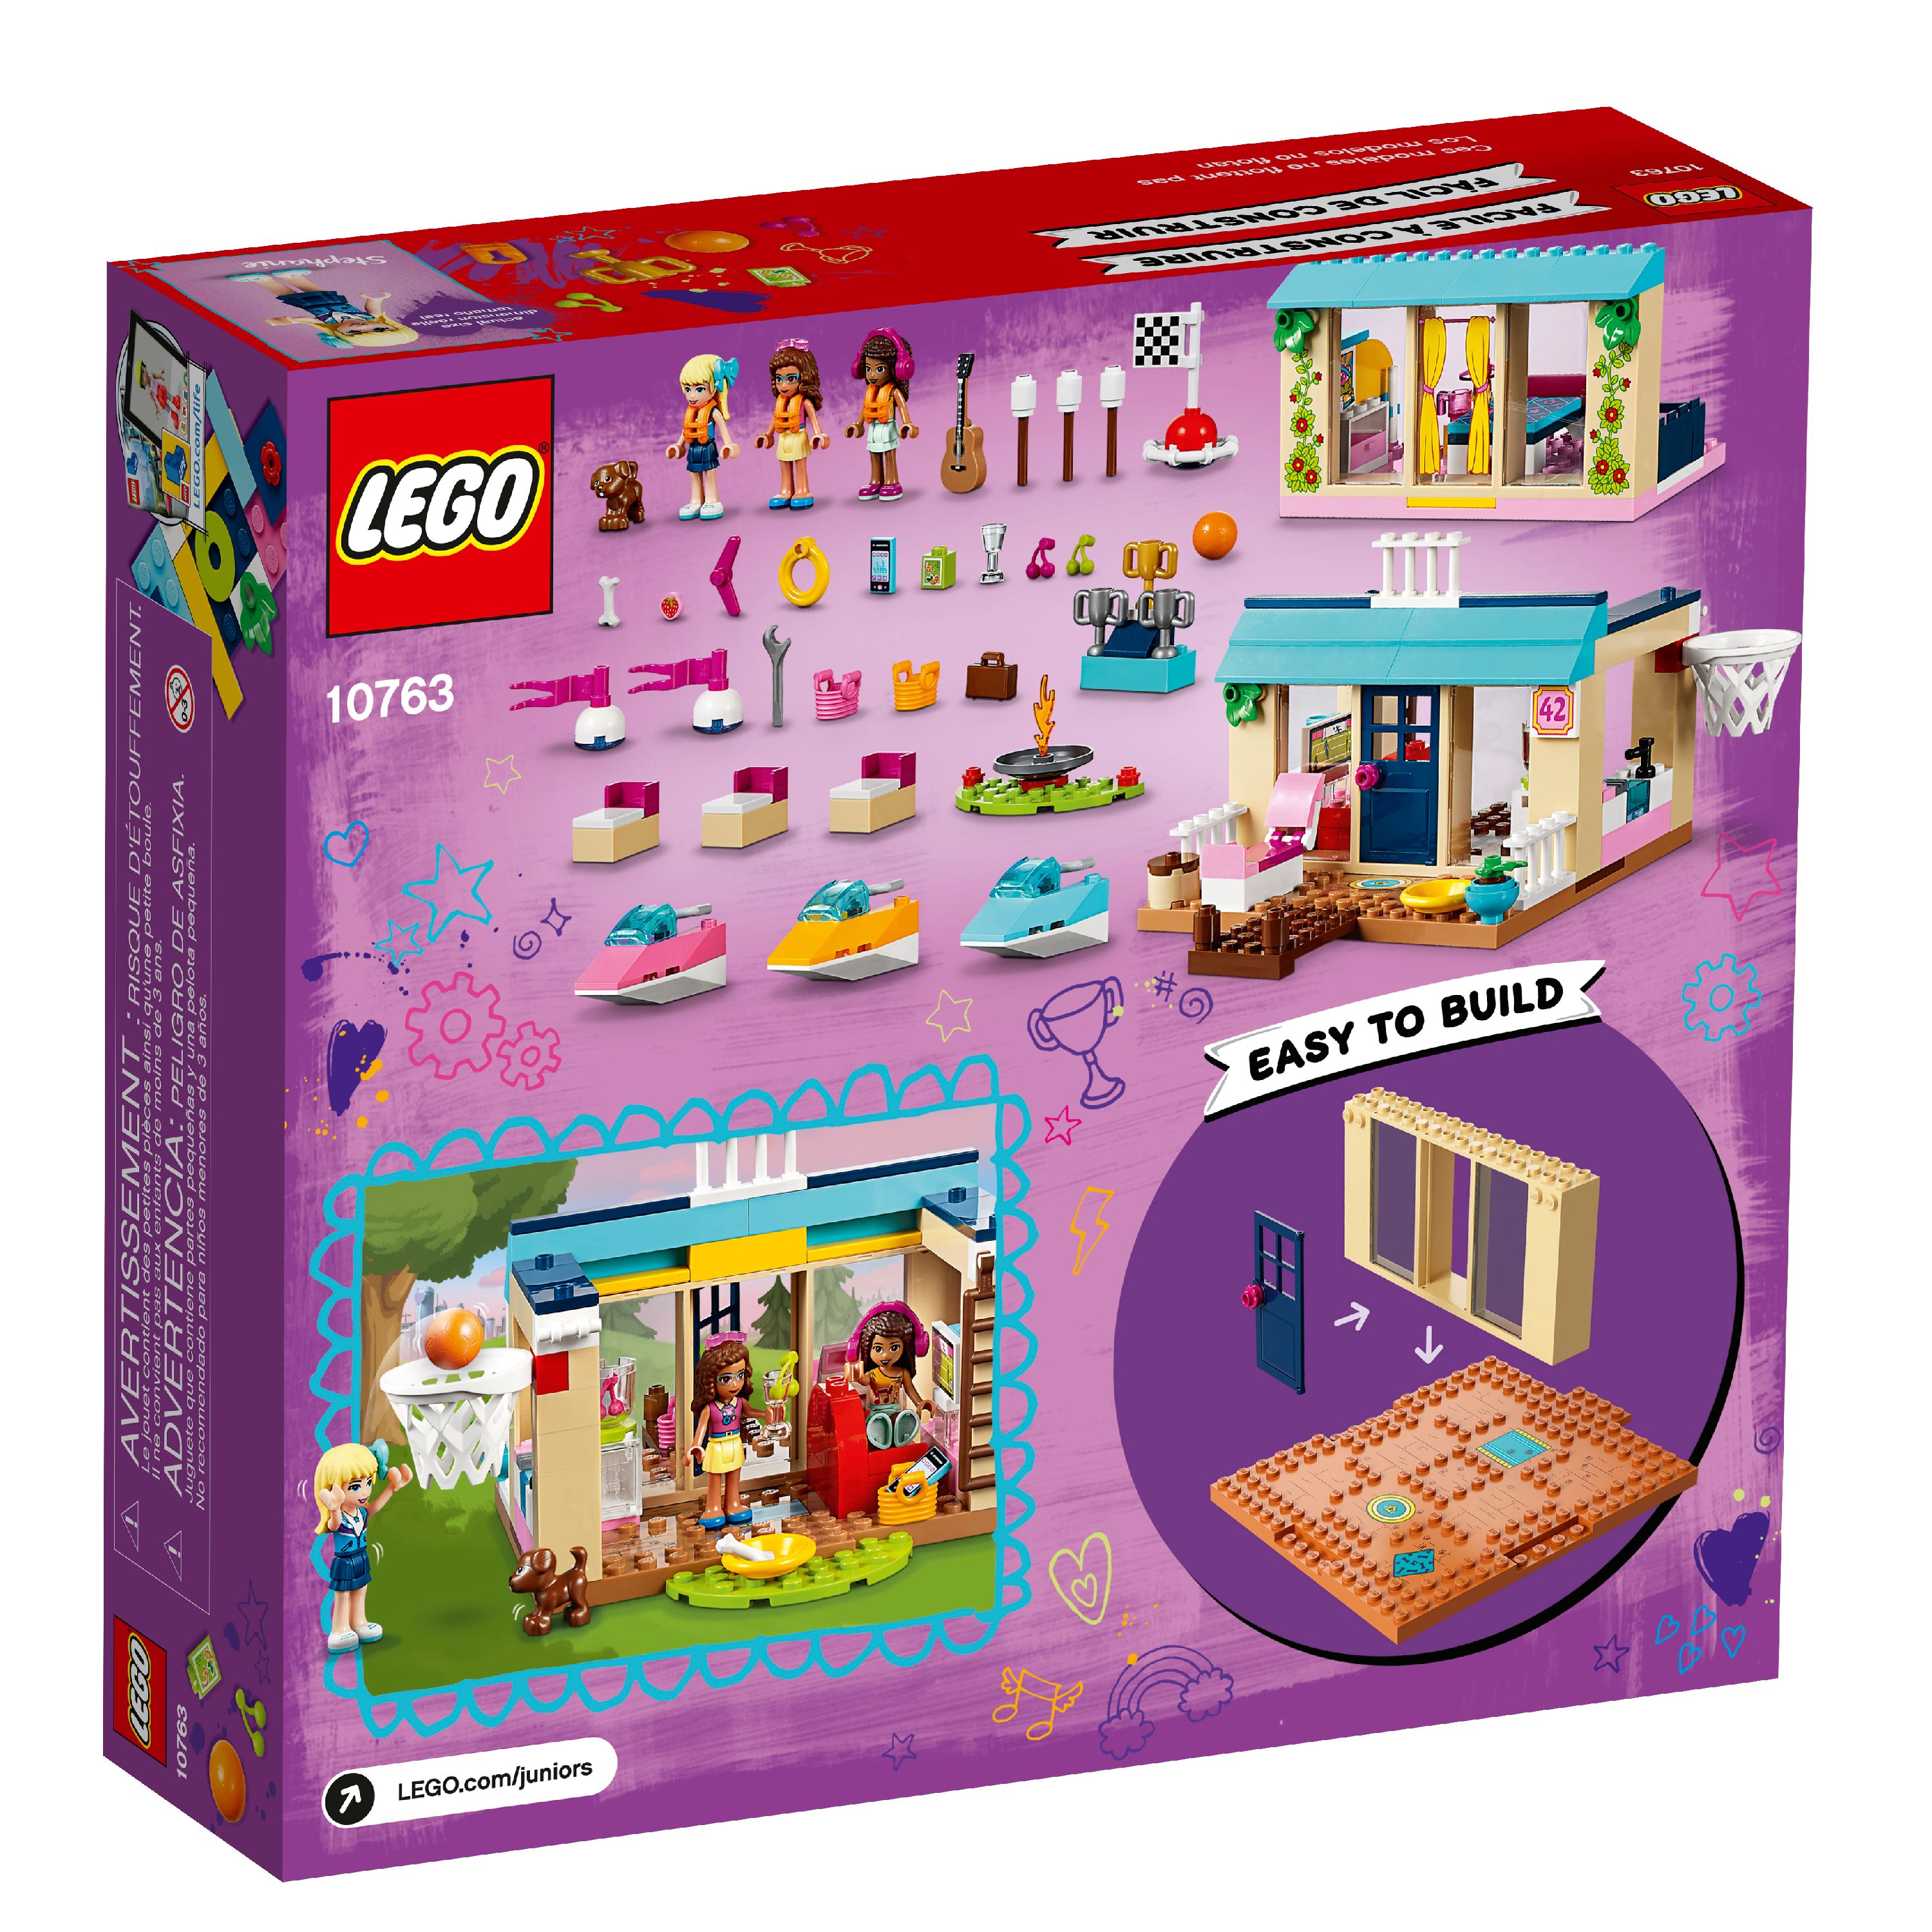 LEGO Juniors Stephanie's Lakeside House 10763 (215 Pieces) - image 3 of 6